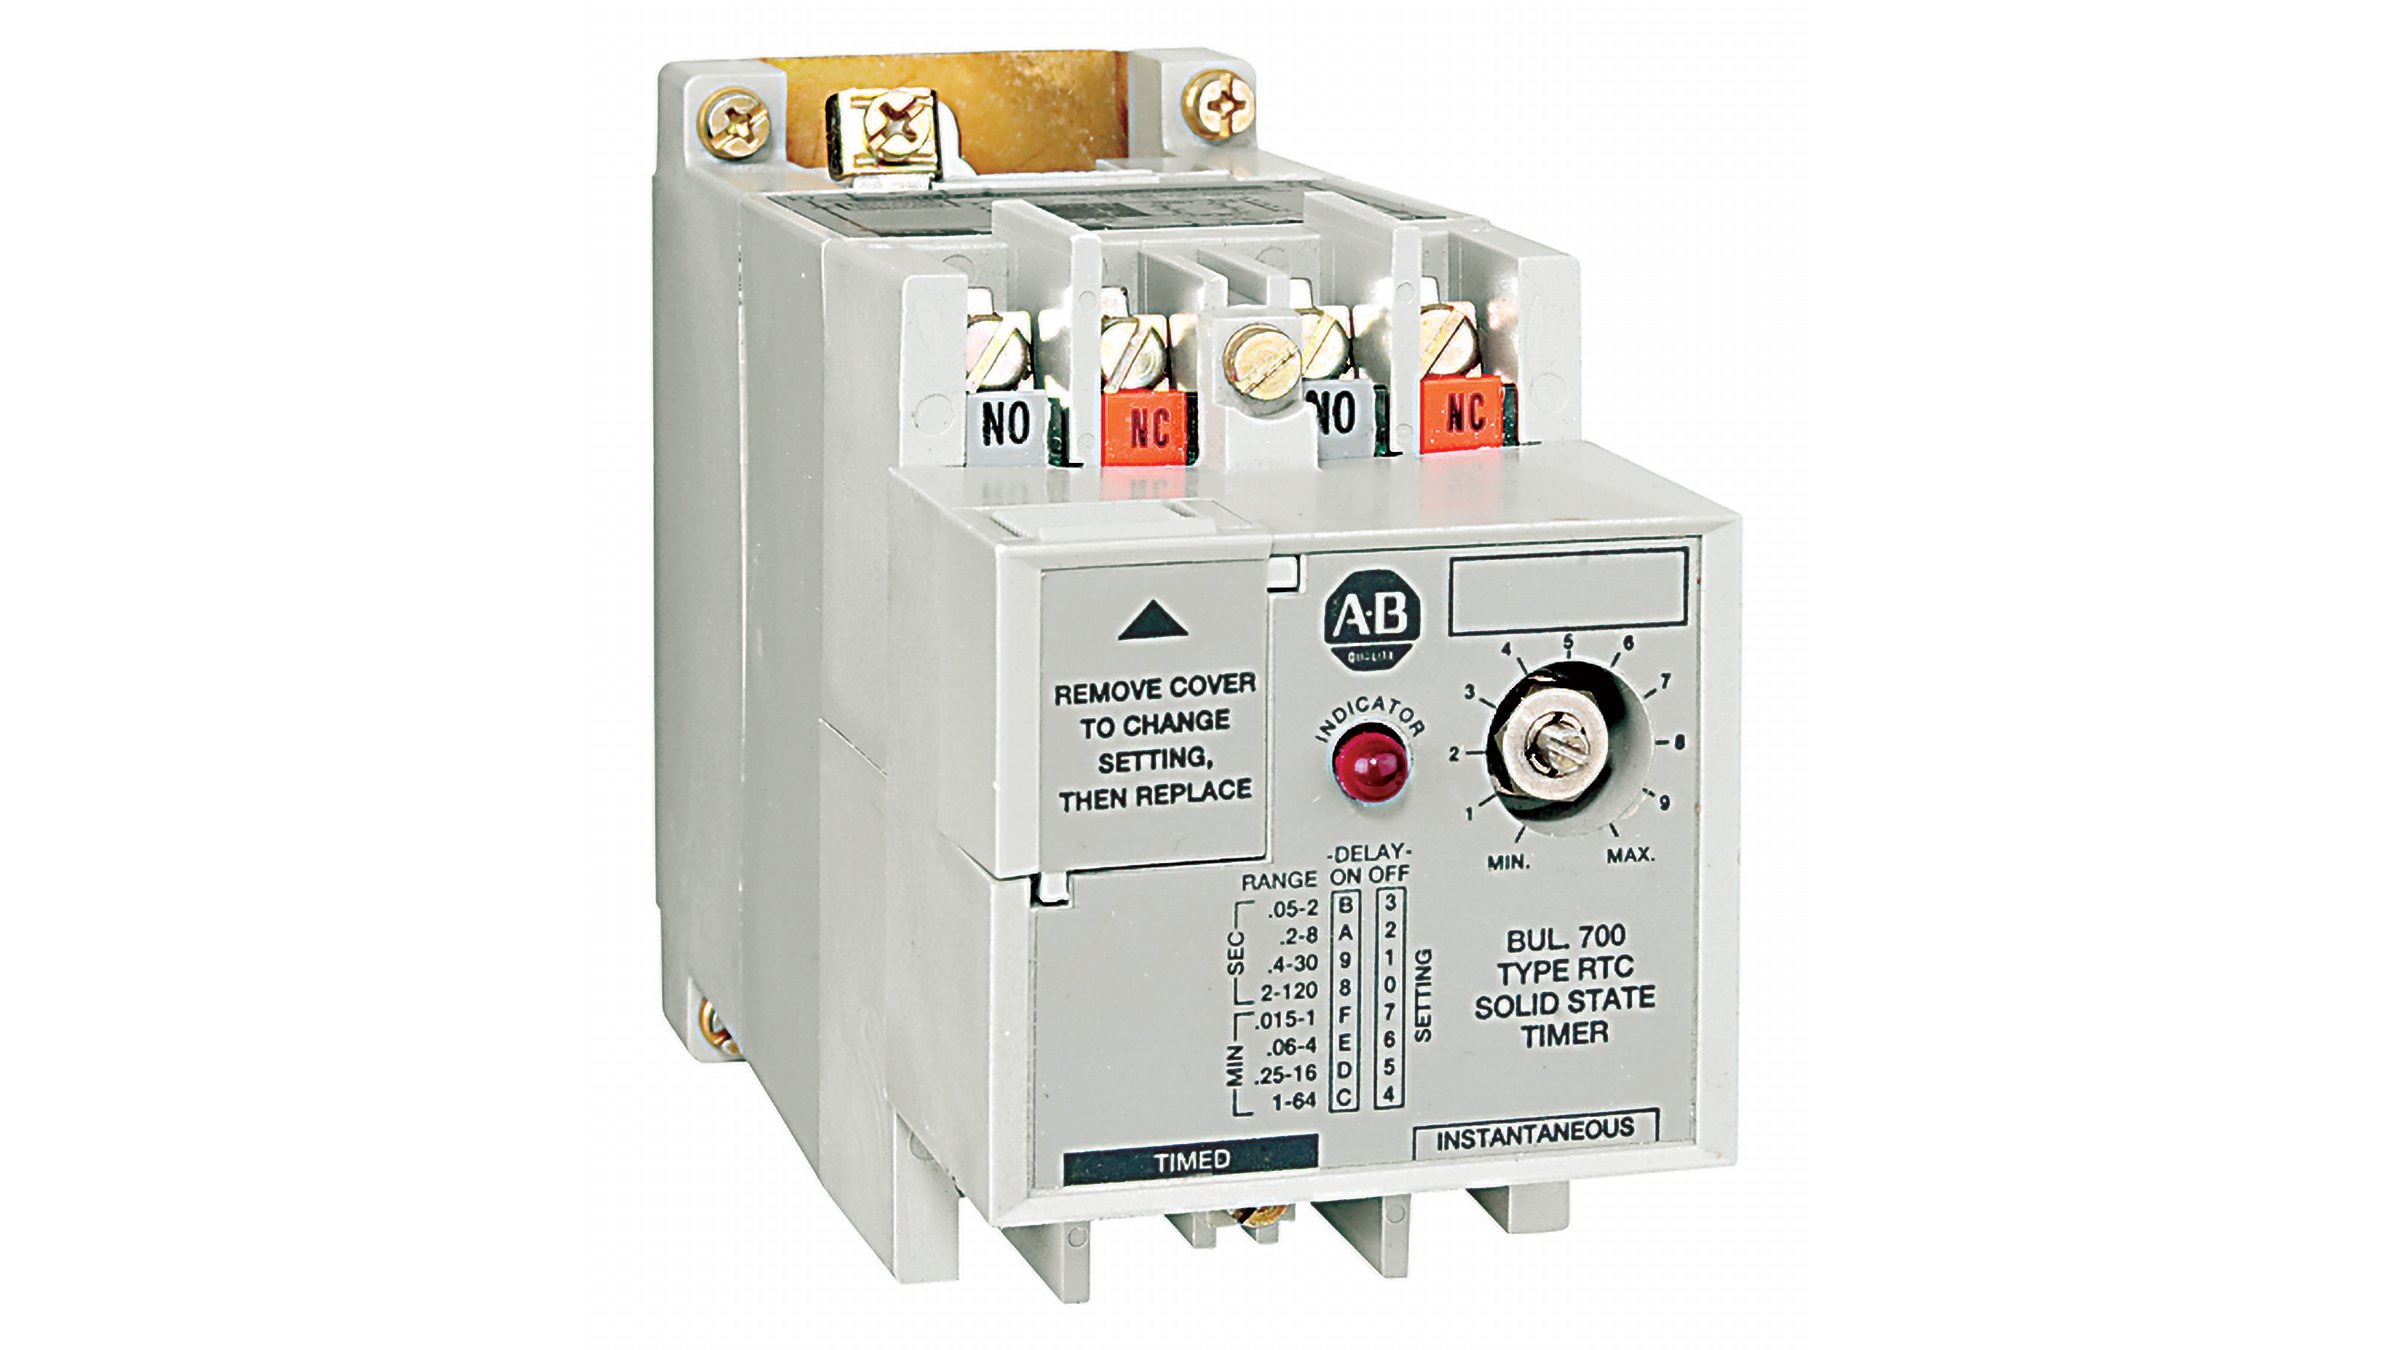 Allen-Bradley Bulletin 700-RTC Solid-state Timing Relays are fixed timing relays designed for applications requiring a specific time delay in which inadvertent timing changes must be avoided.